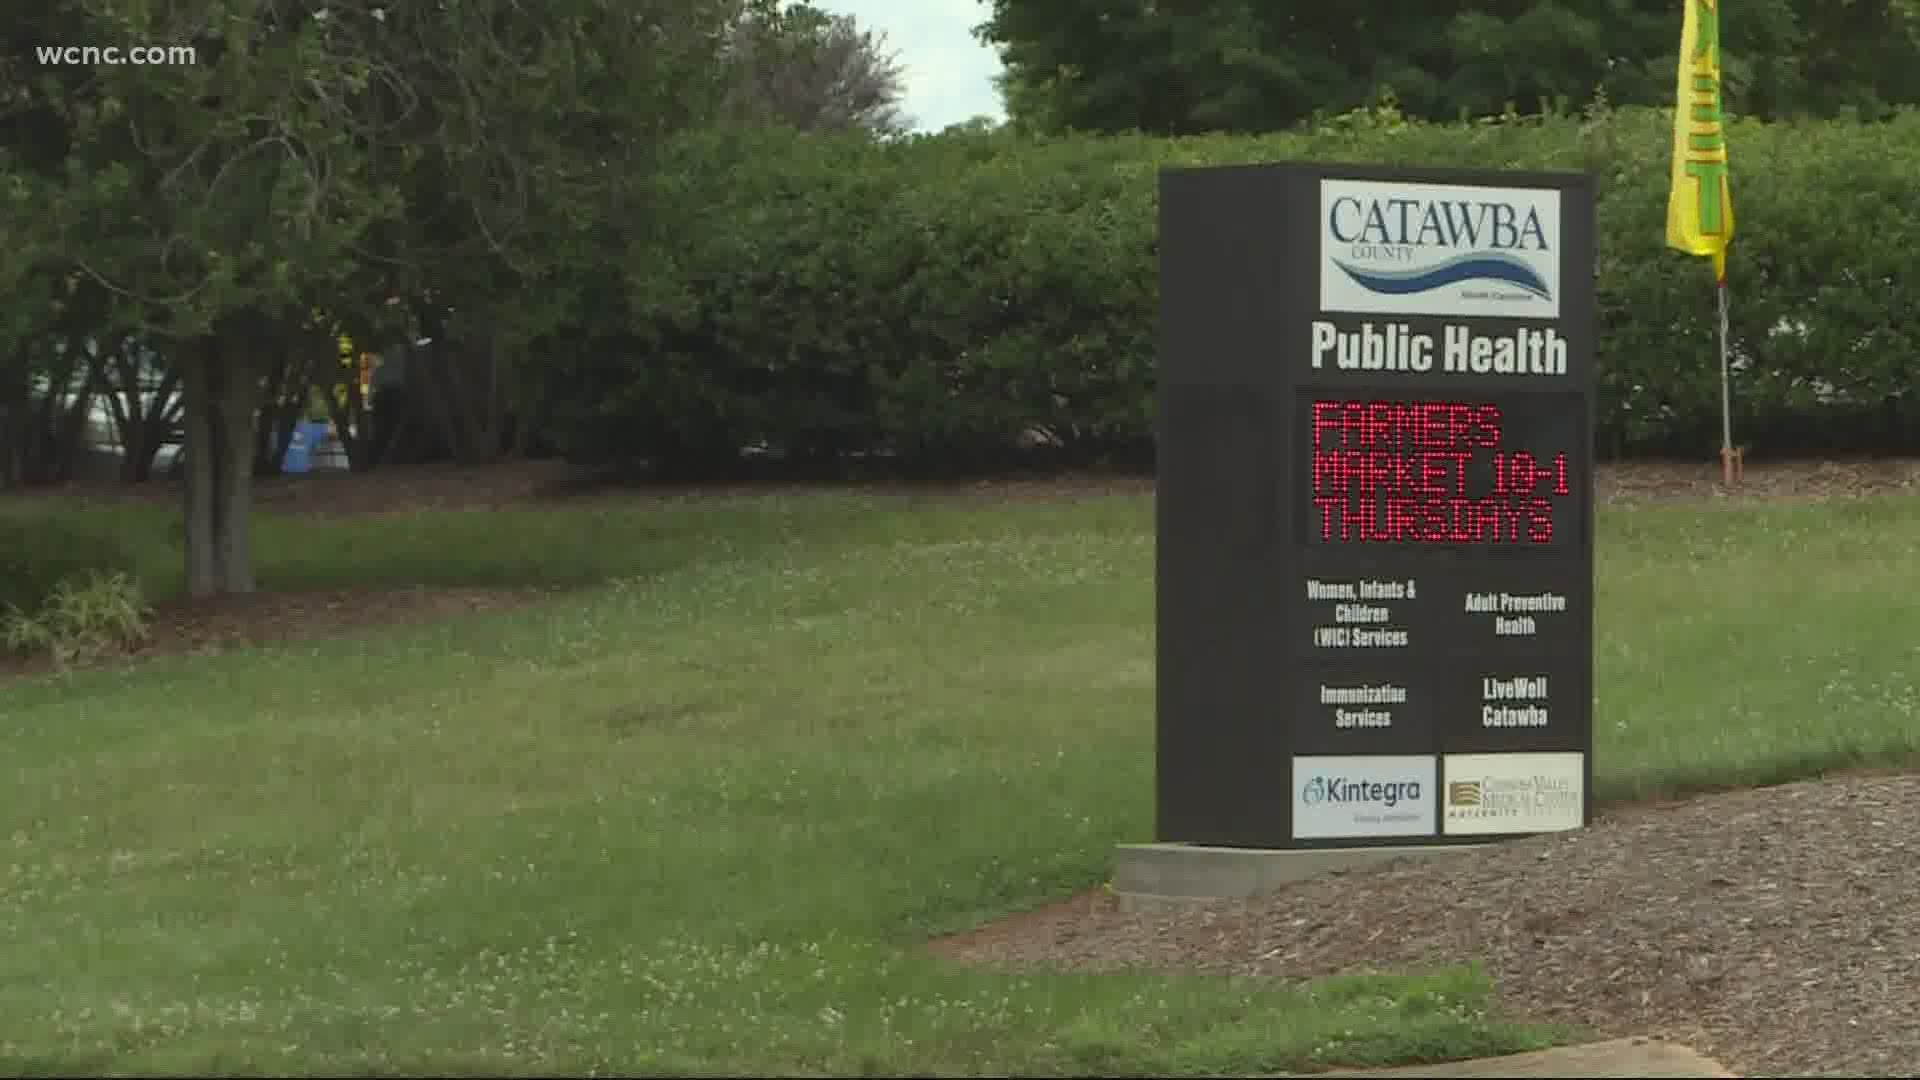 The county health department is warning to families to wear masks and practice social distancing after a family gathering leads to 41 people with COVID-19